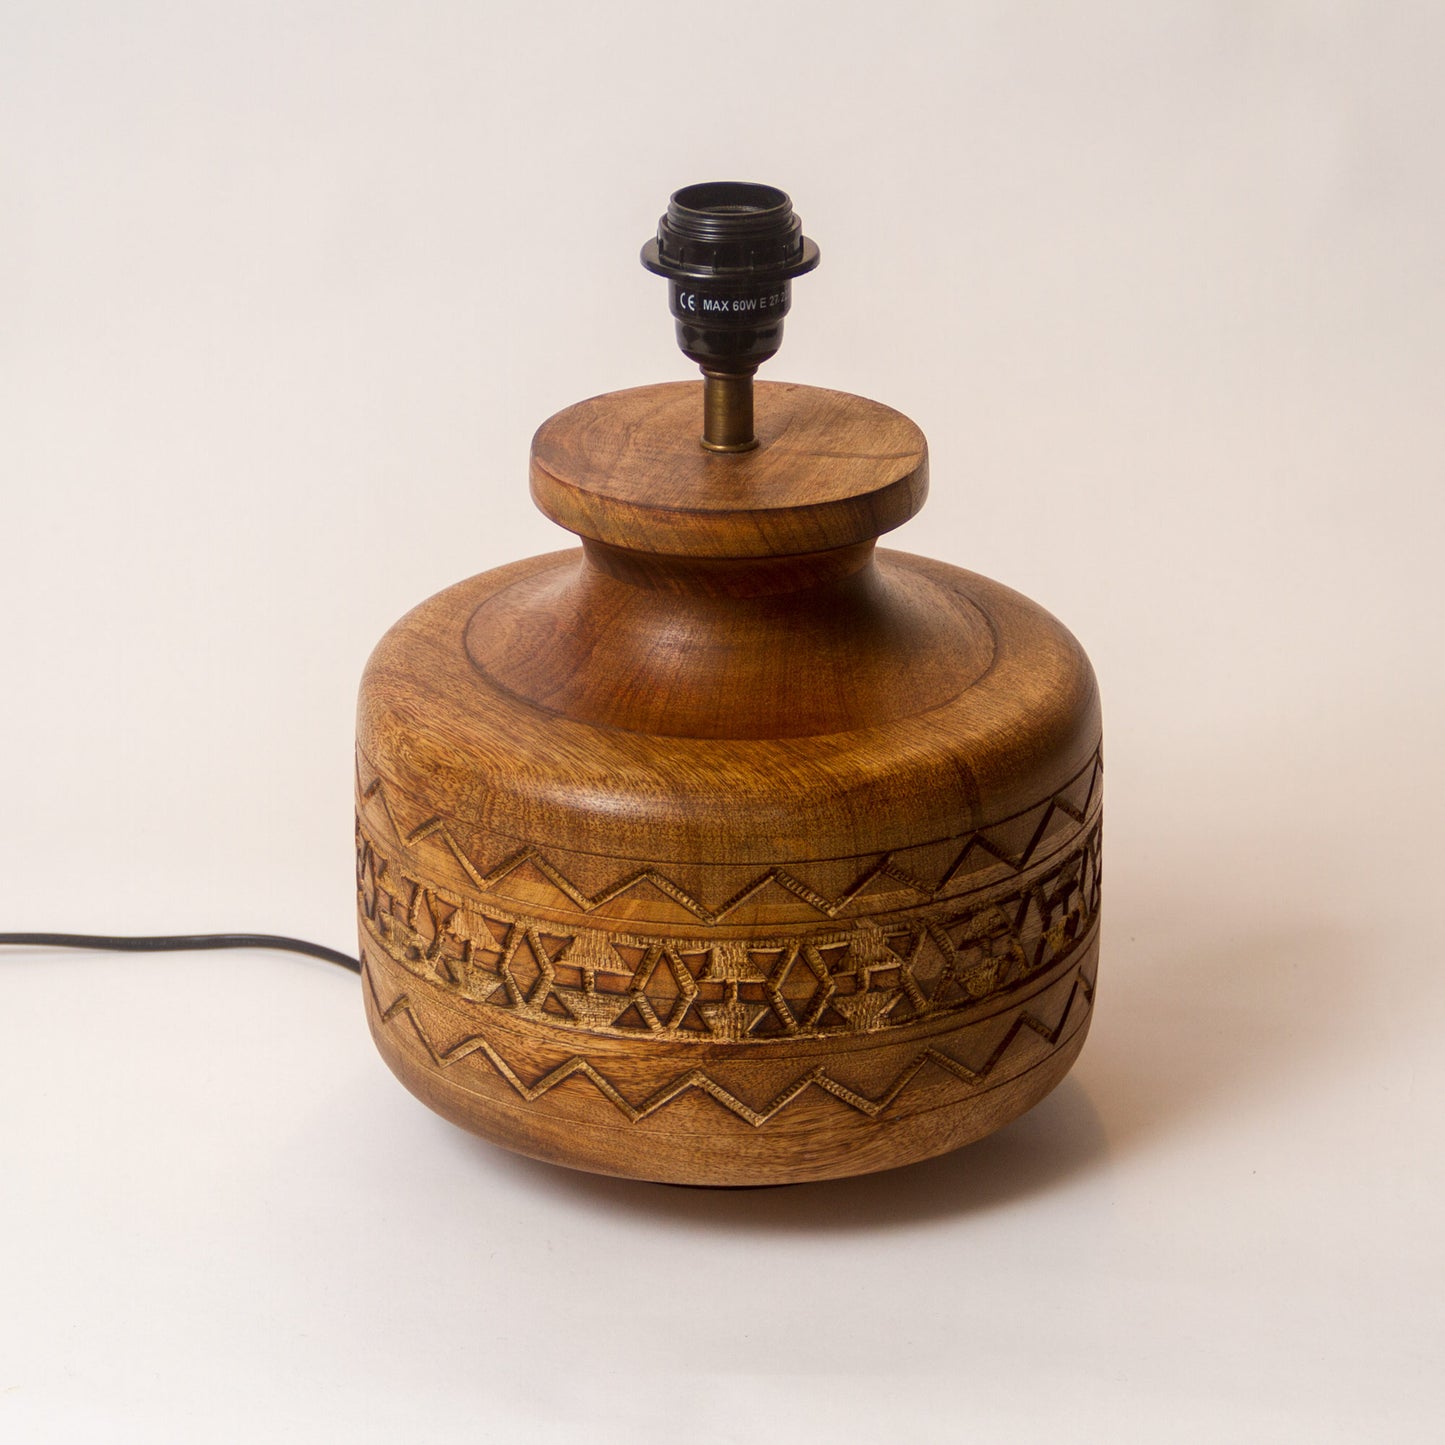 Kanpur Carved Wooden Table Lamp Base with Oval Lamp Shade P42 (40cm wide x 30cm High x 30cm Deep)